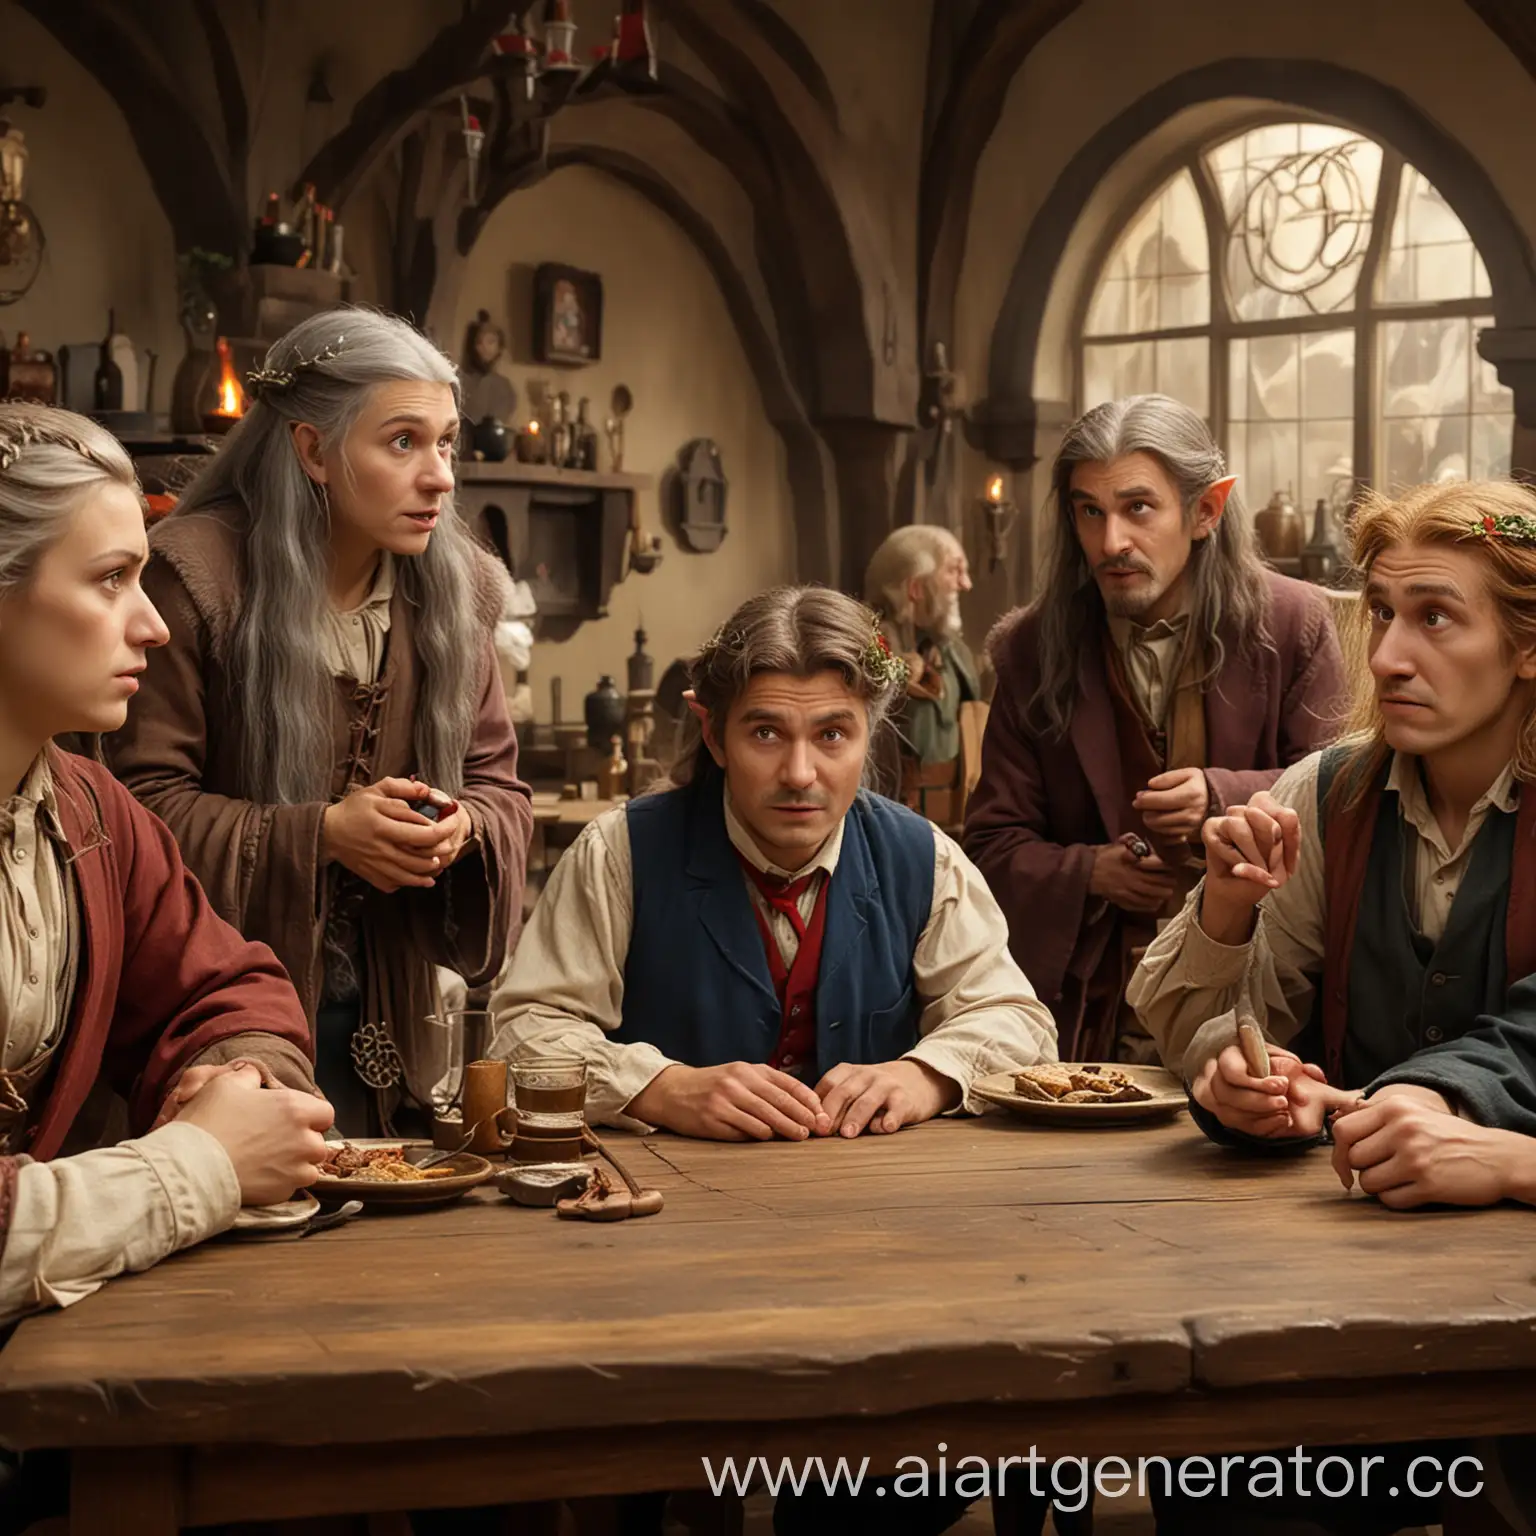 mousewoman, jesus, bilbo baggins, igor nikolaev, slim woman, displeased man and man with disapproving look are sitting at the long table and argueing